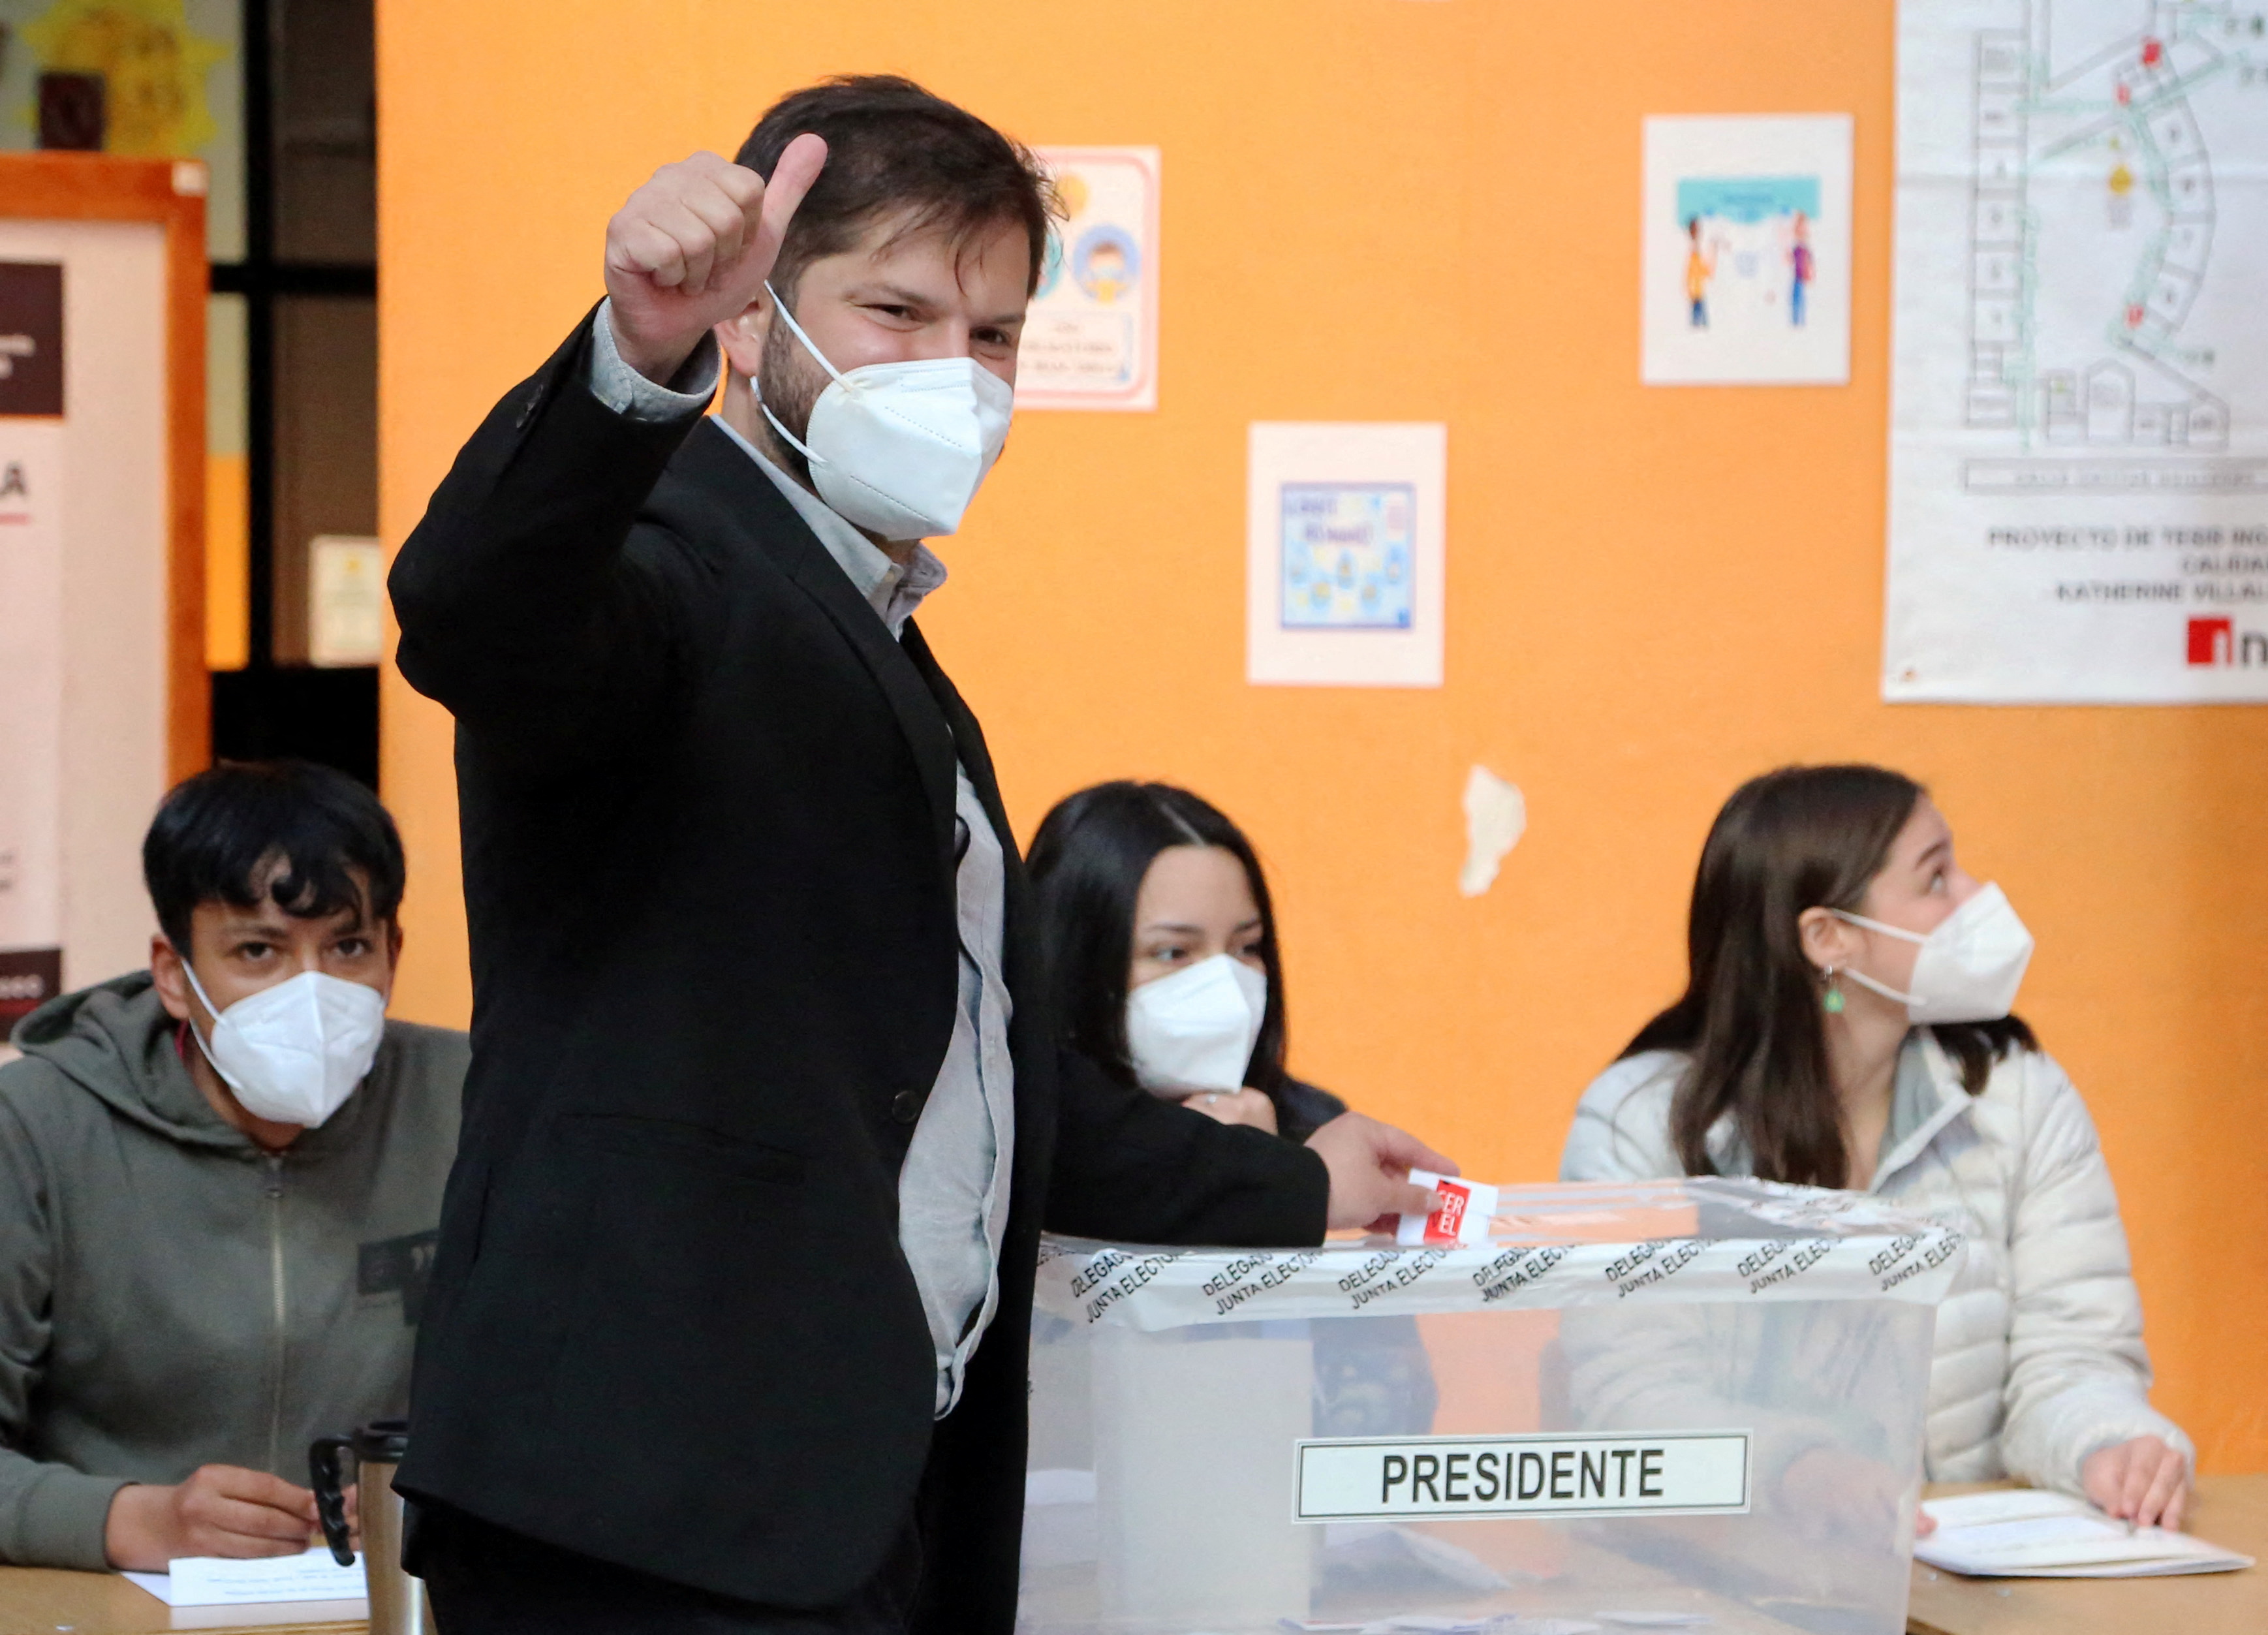 Chileans vote in presidential elections in Punta Arenas